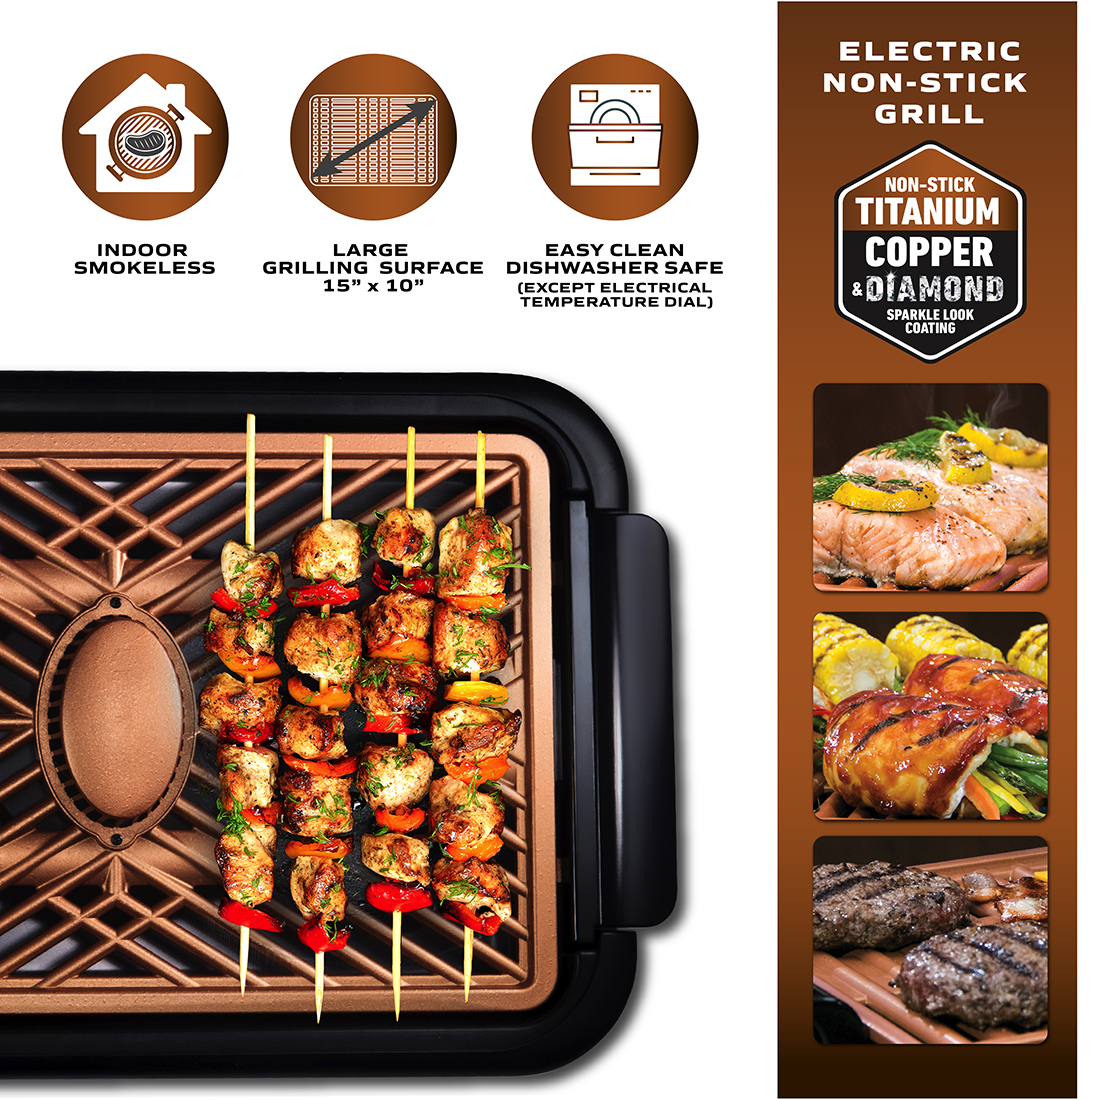 Gotham Steel Smokeless Grill with Fan Indoor Grill Nonstick Electric Grill BBQ Grill As Seen on TV - image 4 of 7